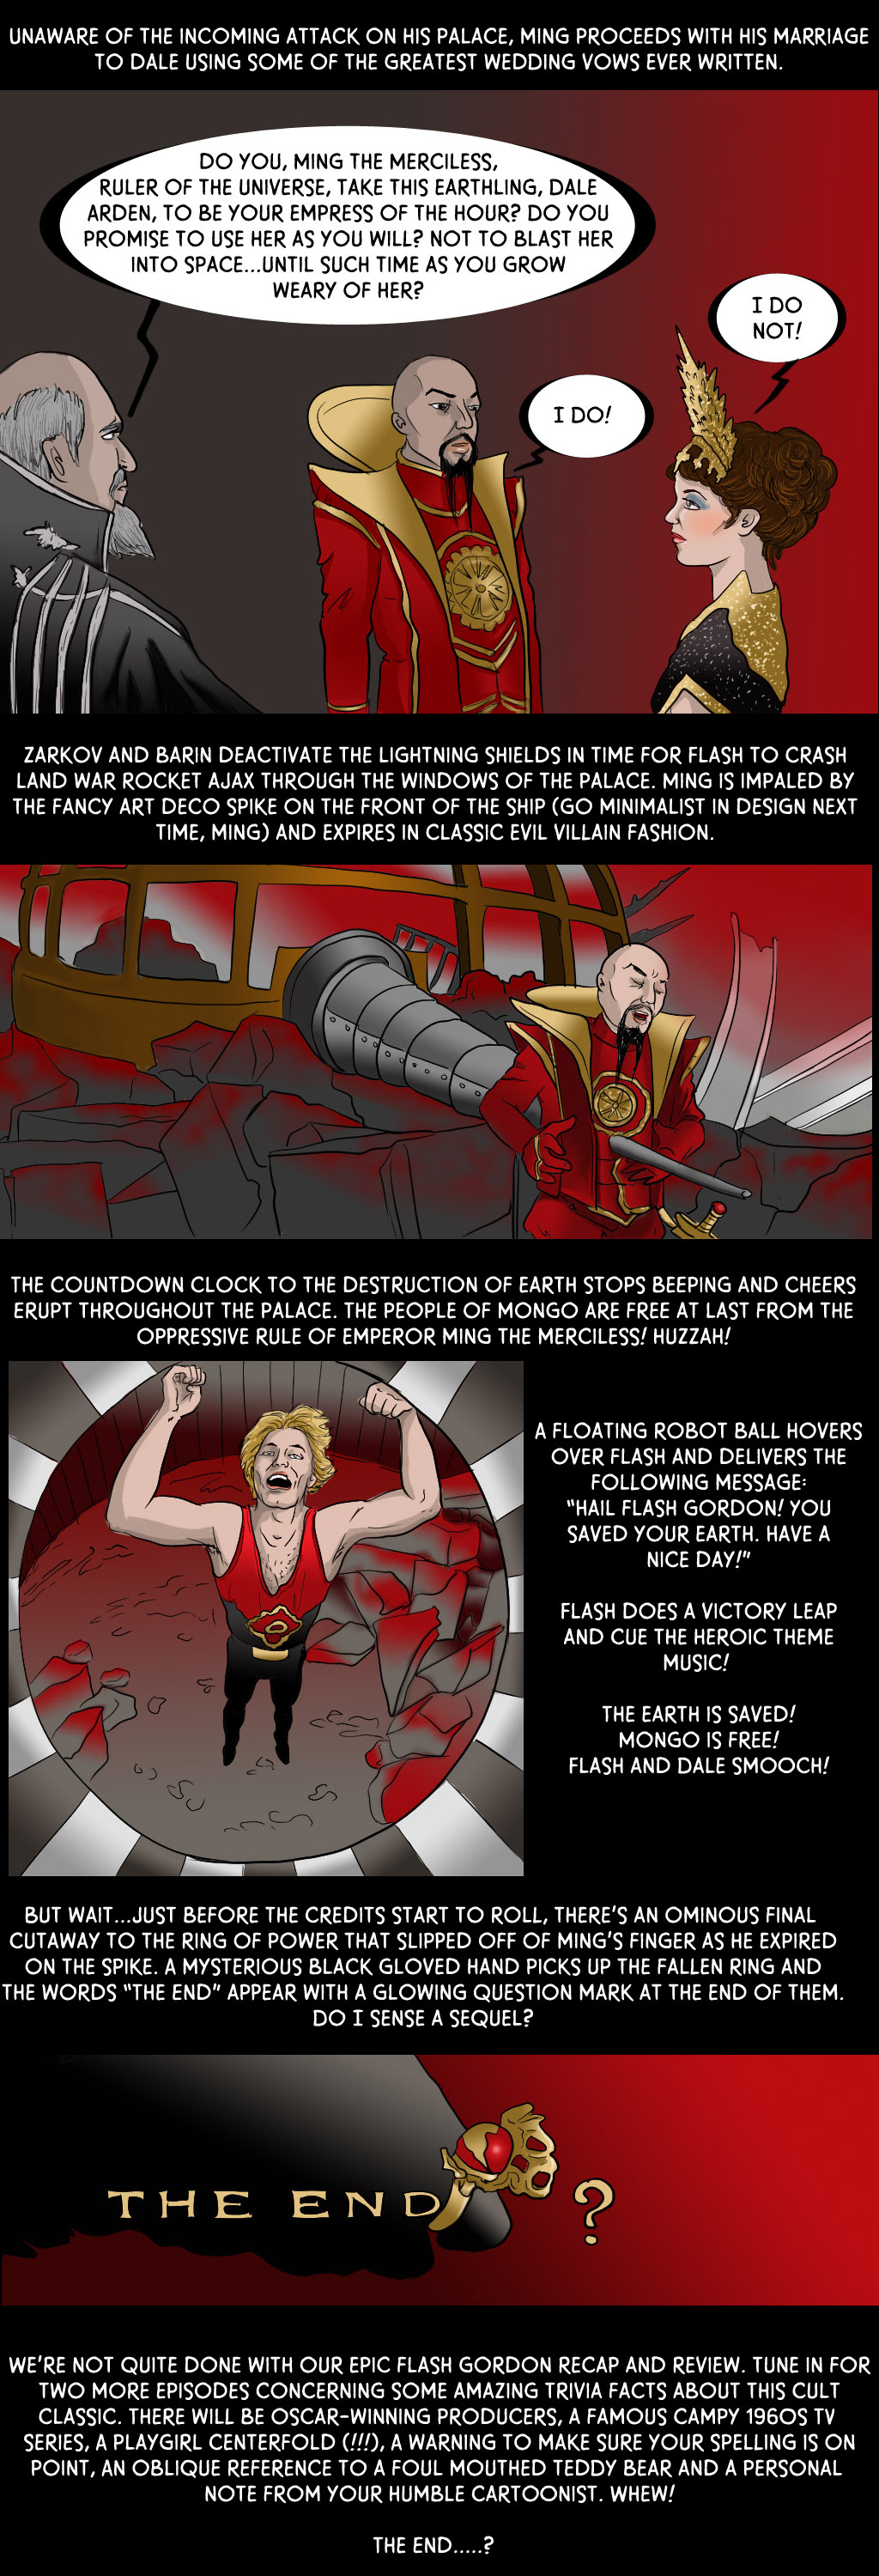 Flash Gordon Page 7 (The end of the recap!)